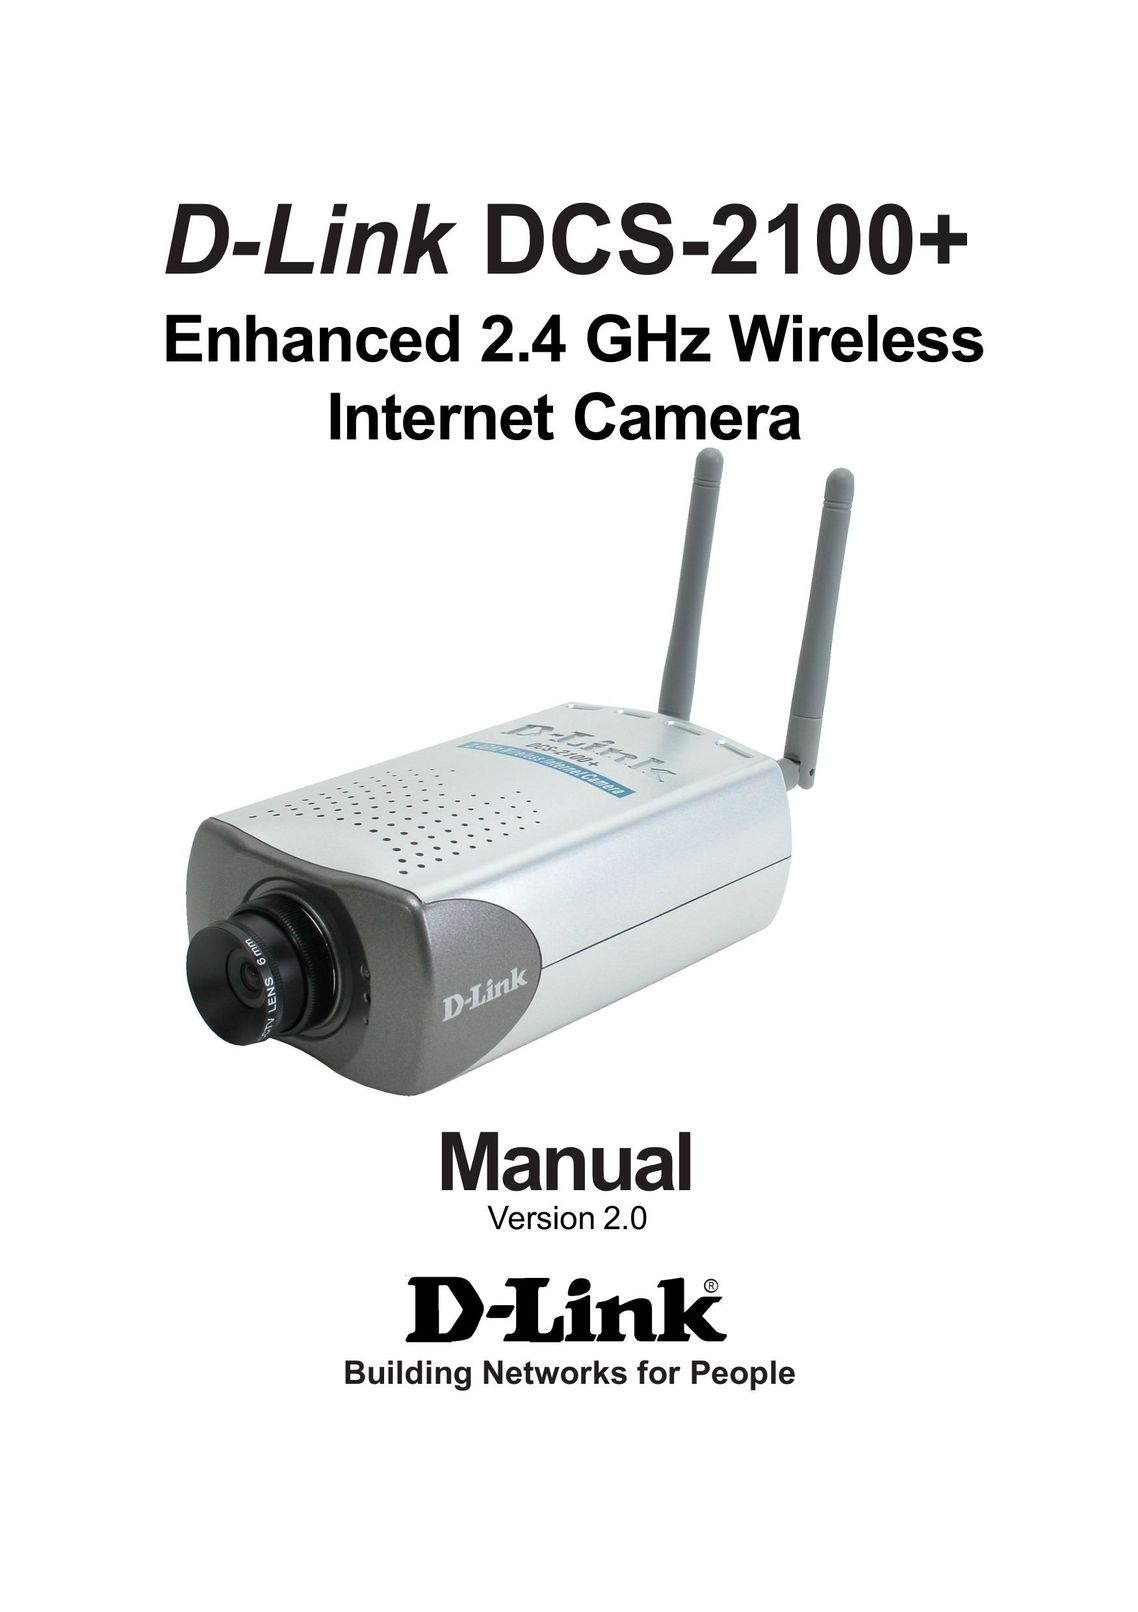 D-Link DCS-2100+ Home Security System User Manual